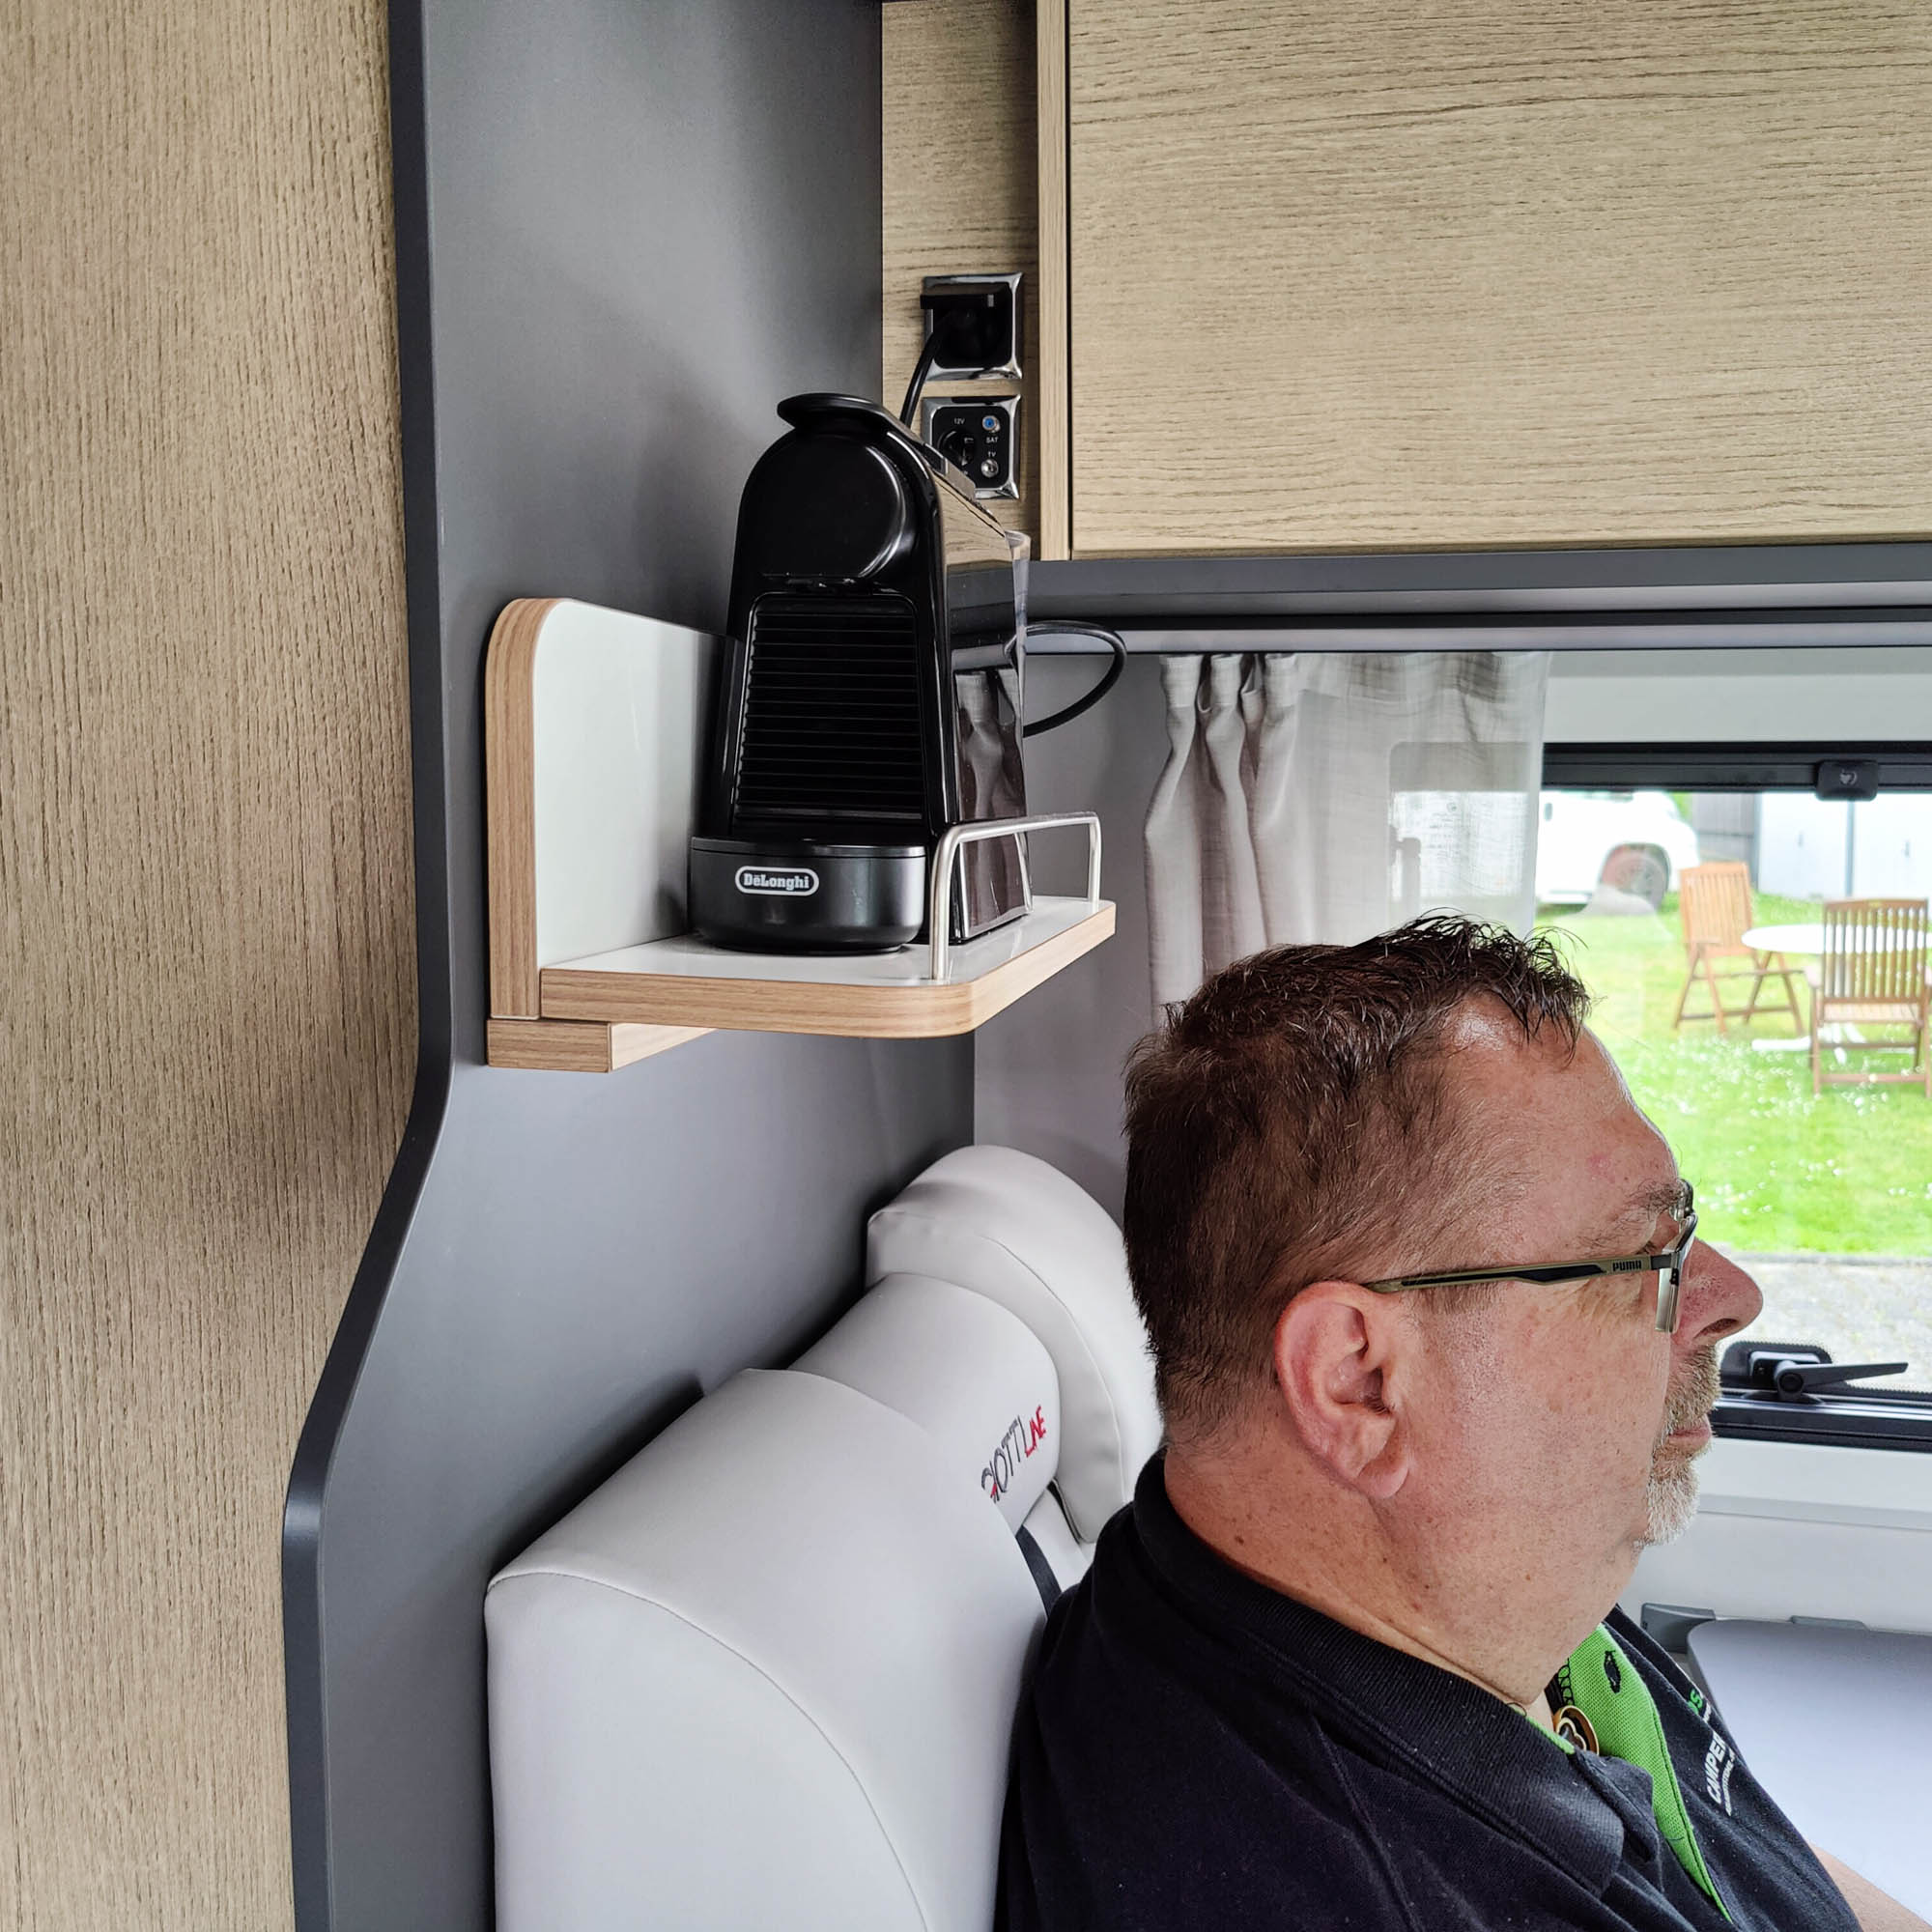 Sufficient headroom even with motorhome shelf